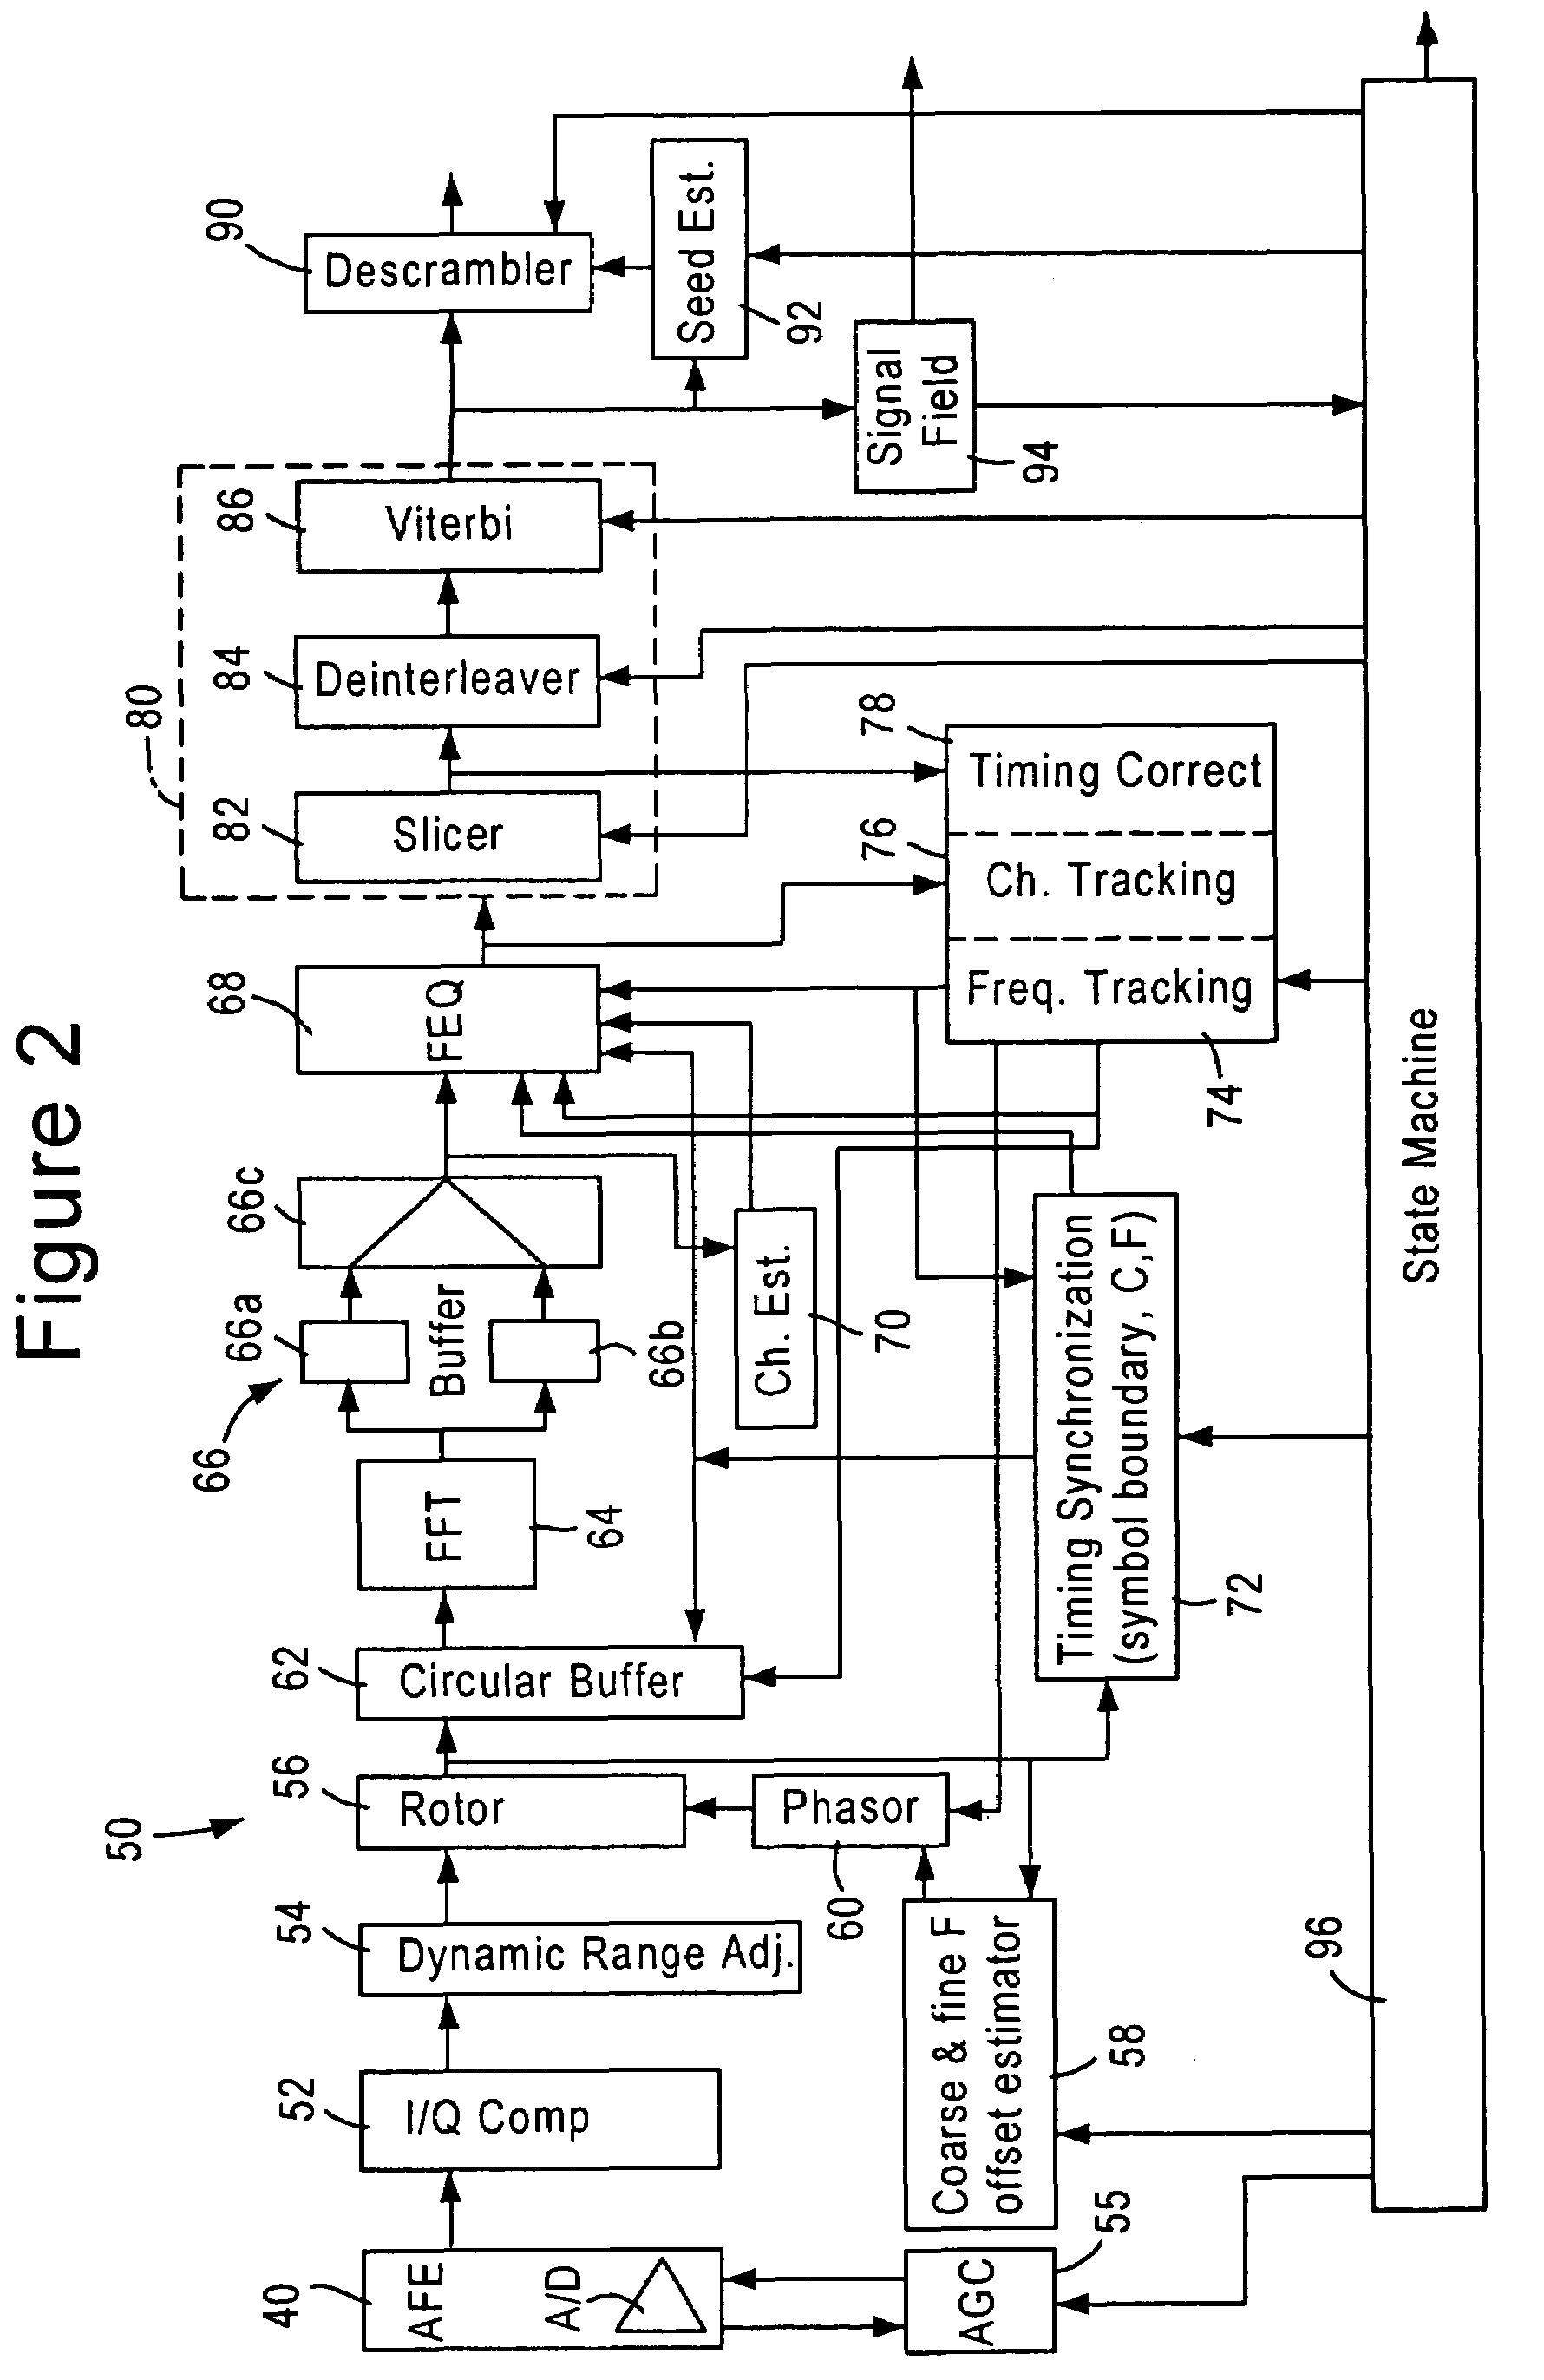 Residual frequency error estimation in an OFDM receiver